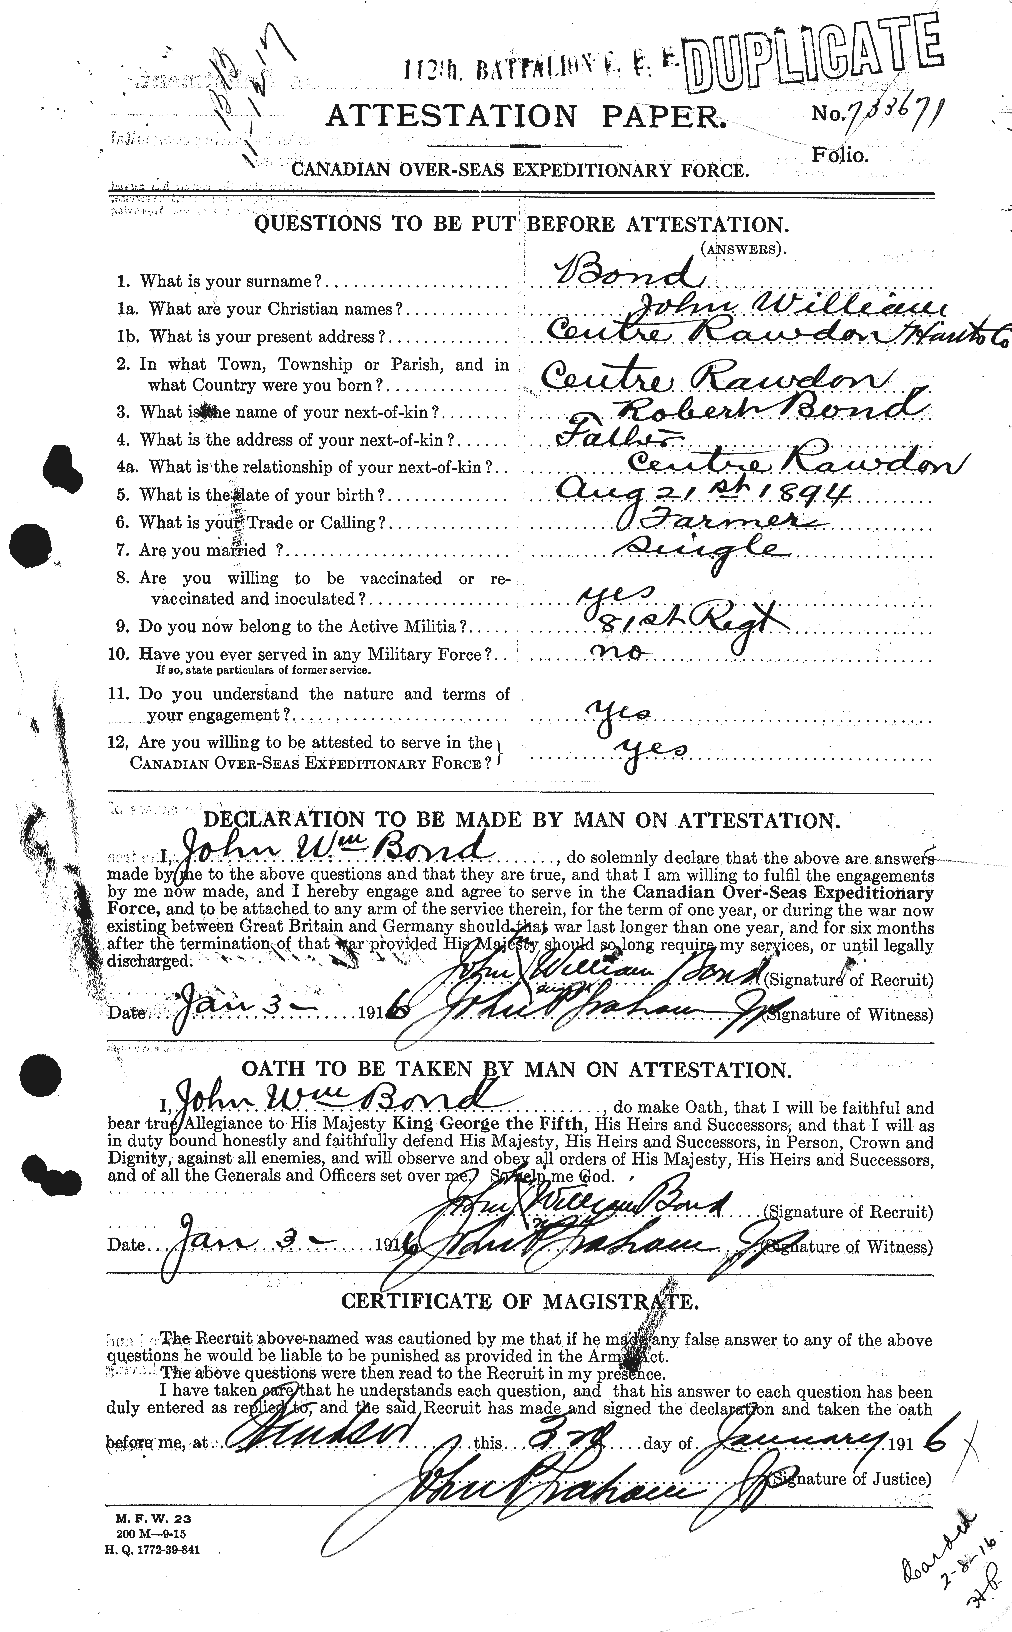 Personnel Records of the First World War - CEF 250373a